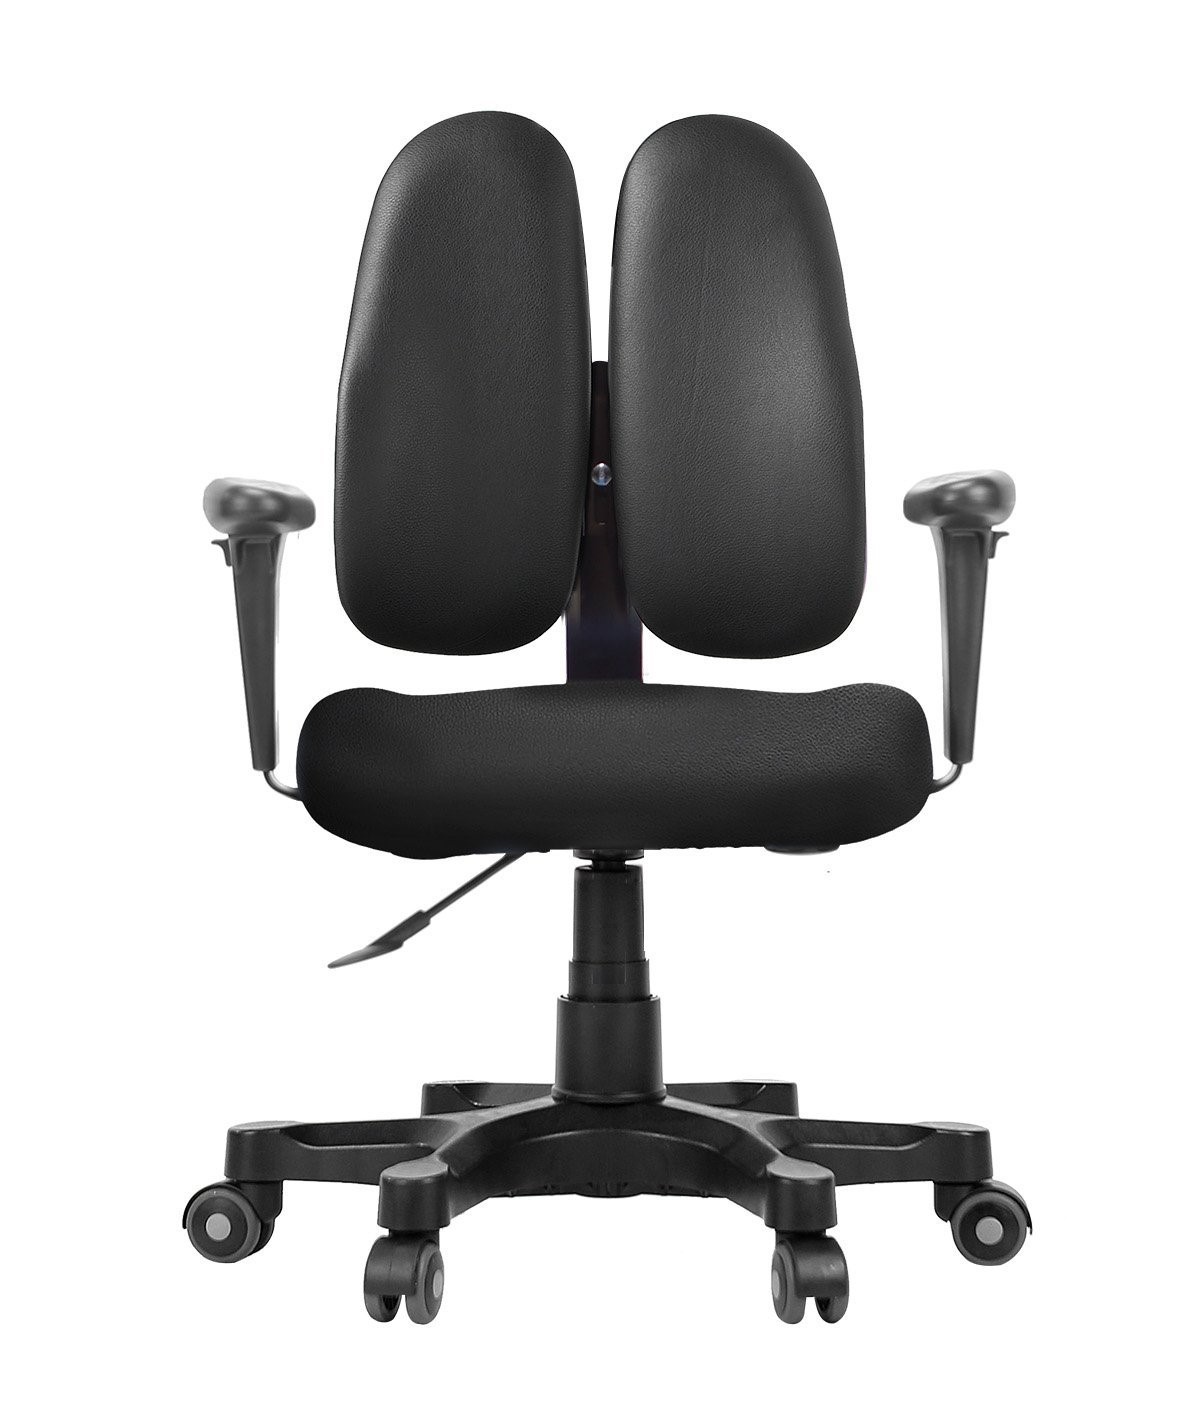 gaming chair ergonomic back protection 2017 best chairs list top 10